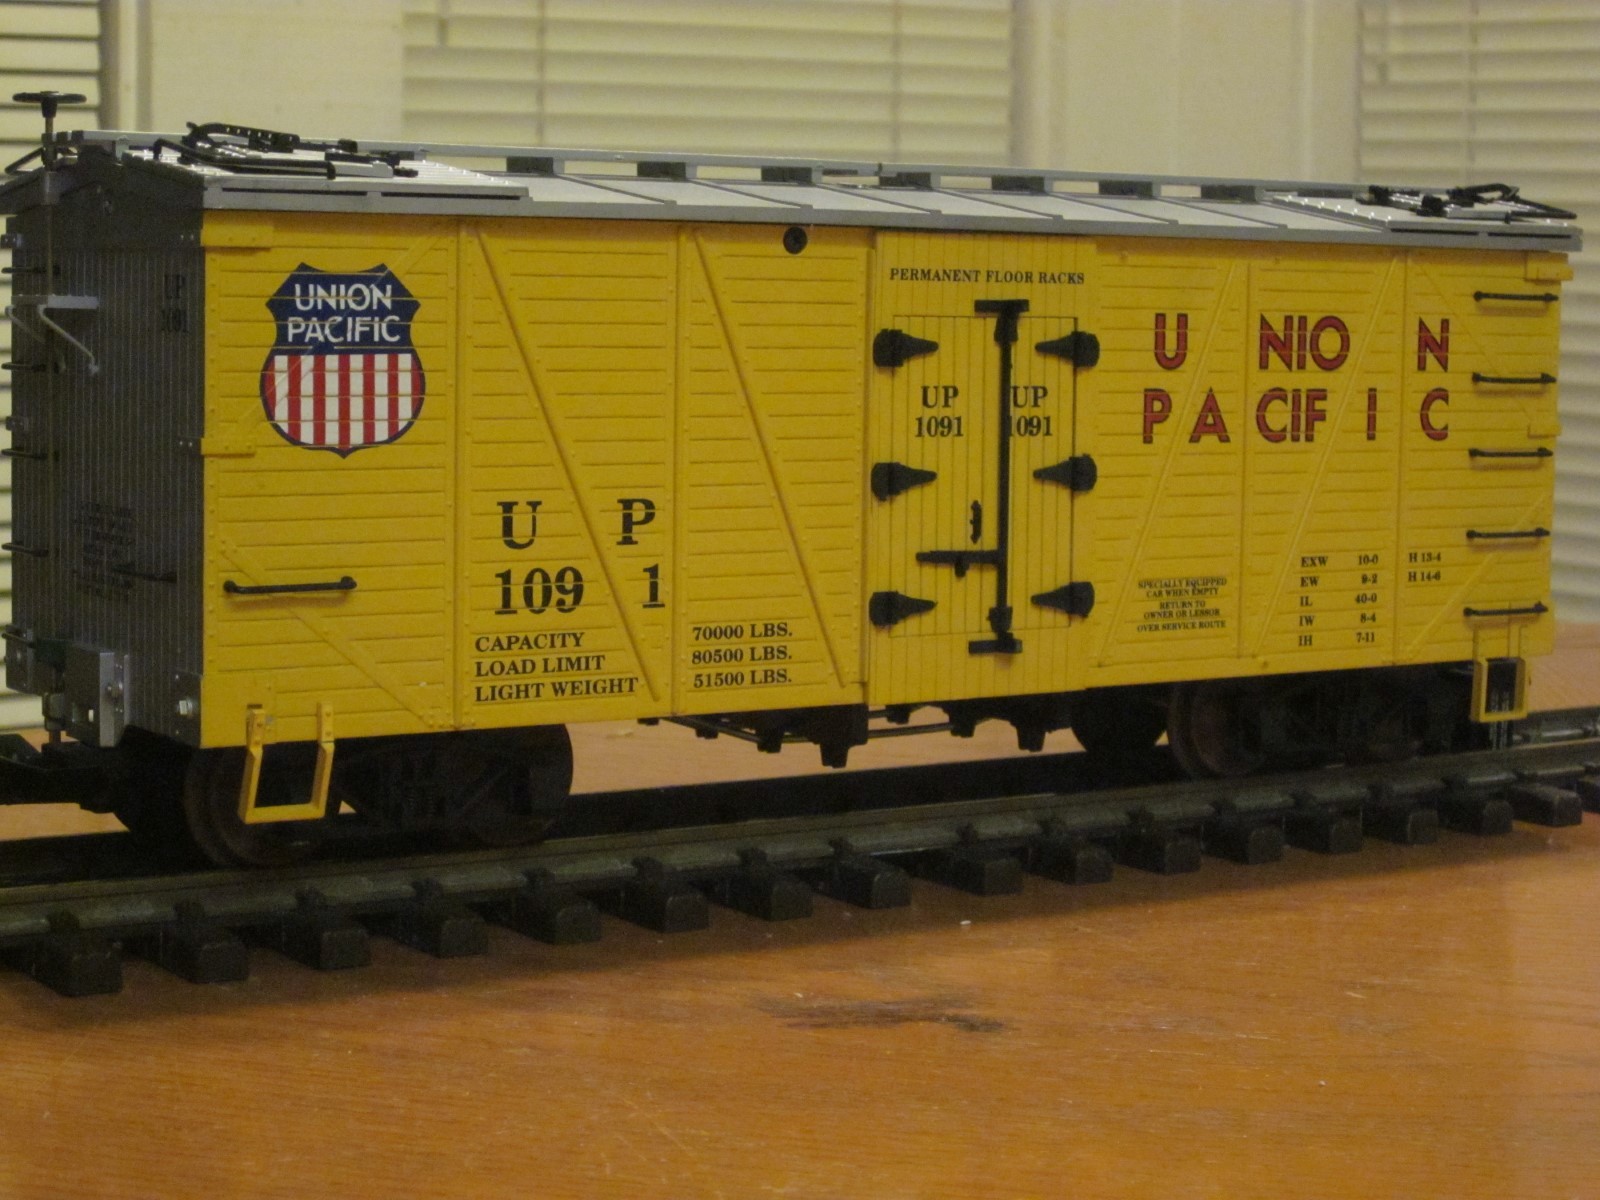 R15012 Union Pacific UP 1091